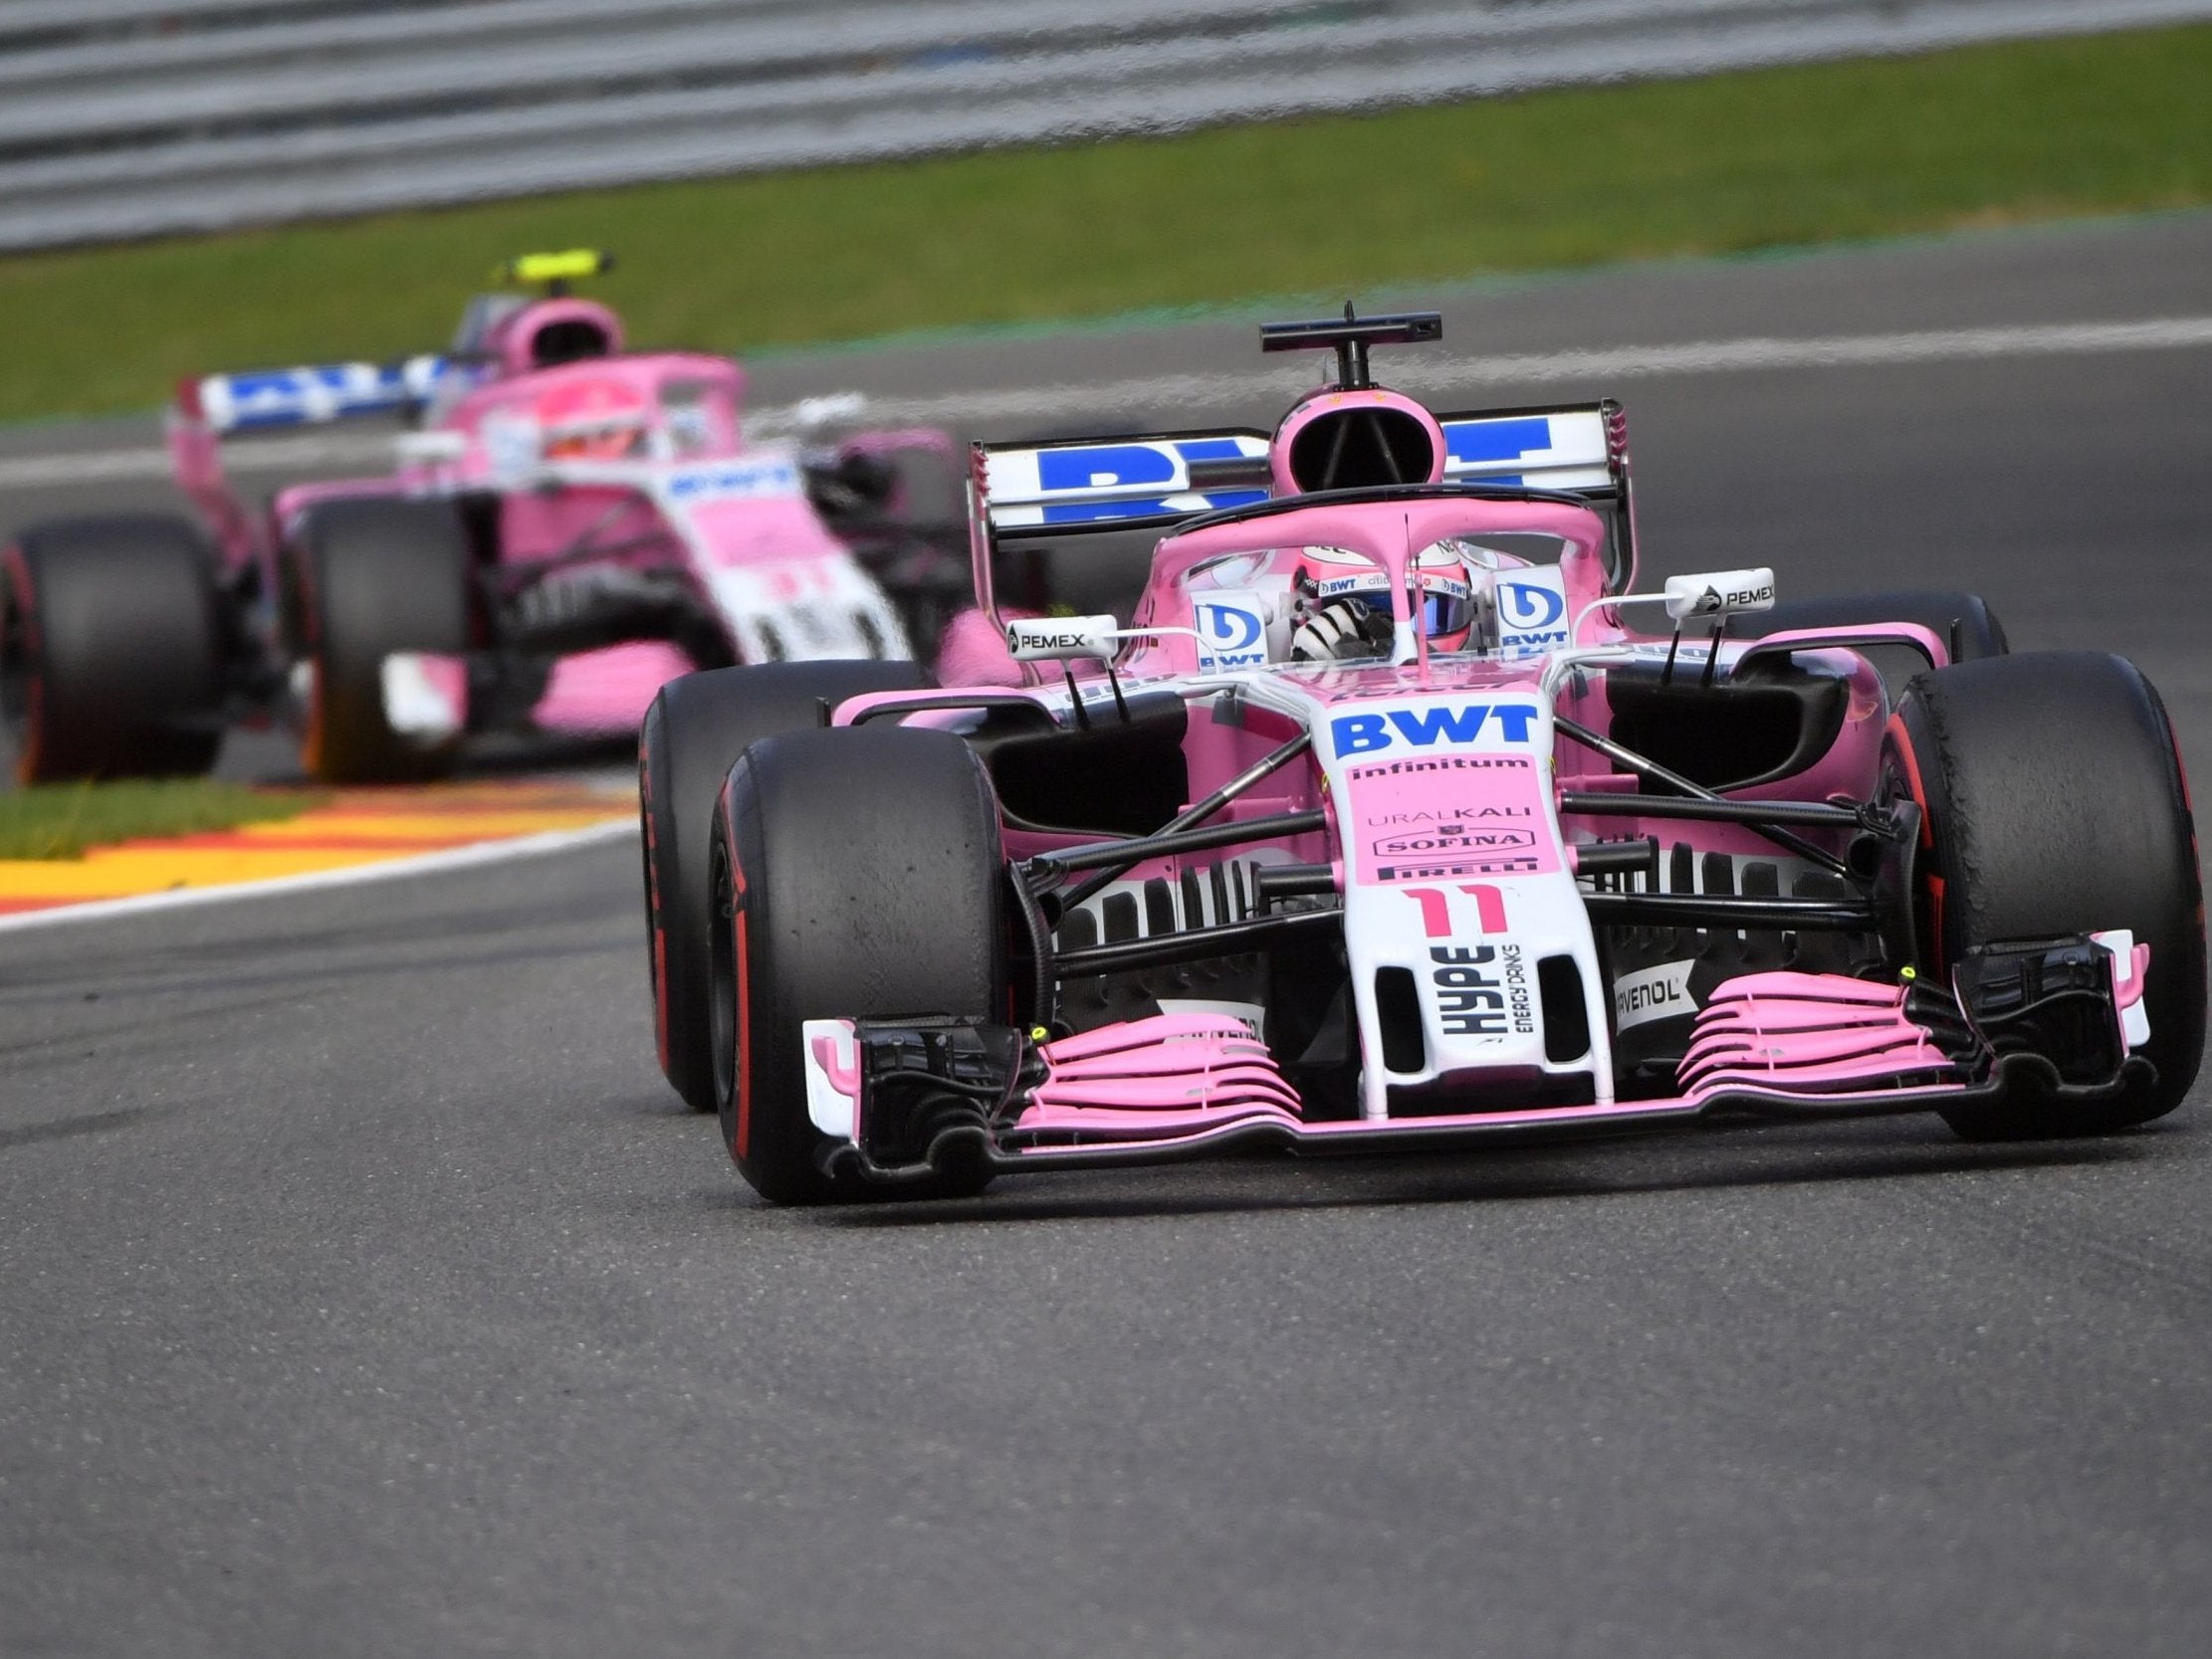 Force India's return from the dead wasn't without its problems